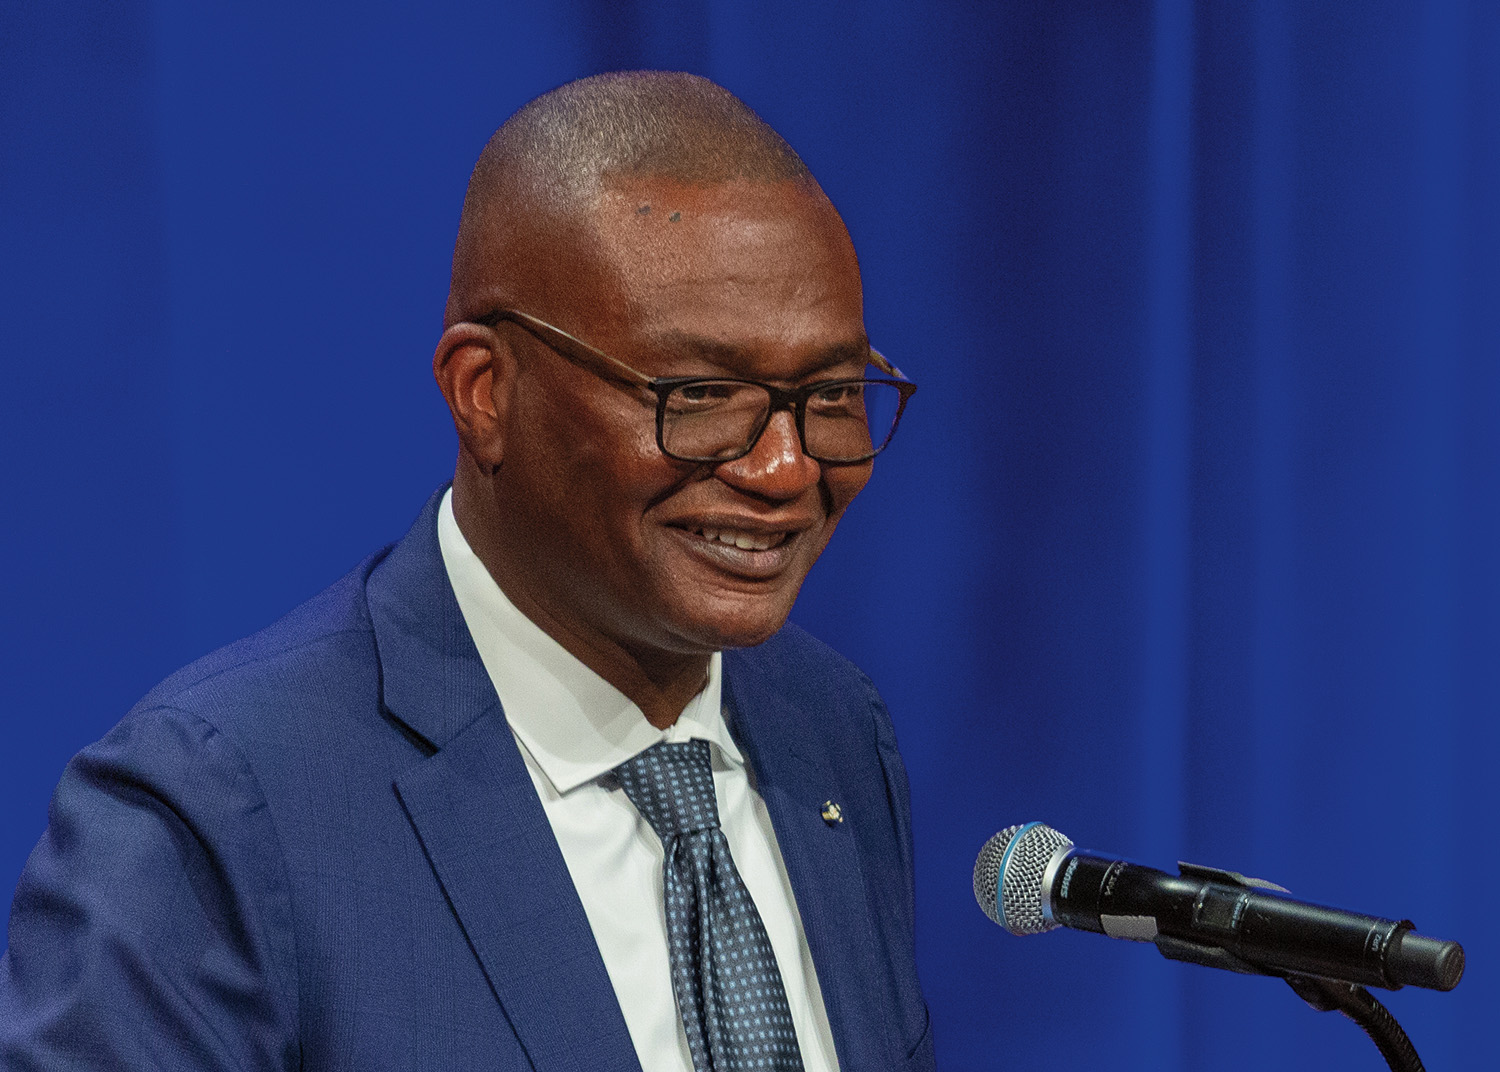 Kerwin Charles stands at a podium in front of a microphone. He smiles. He has short, black hair and dark brown skin. He wears glasses, a white collared shirt, a tie with tiny blue squares, and a dark blue suit with pins on the lapel.